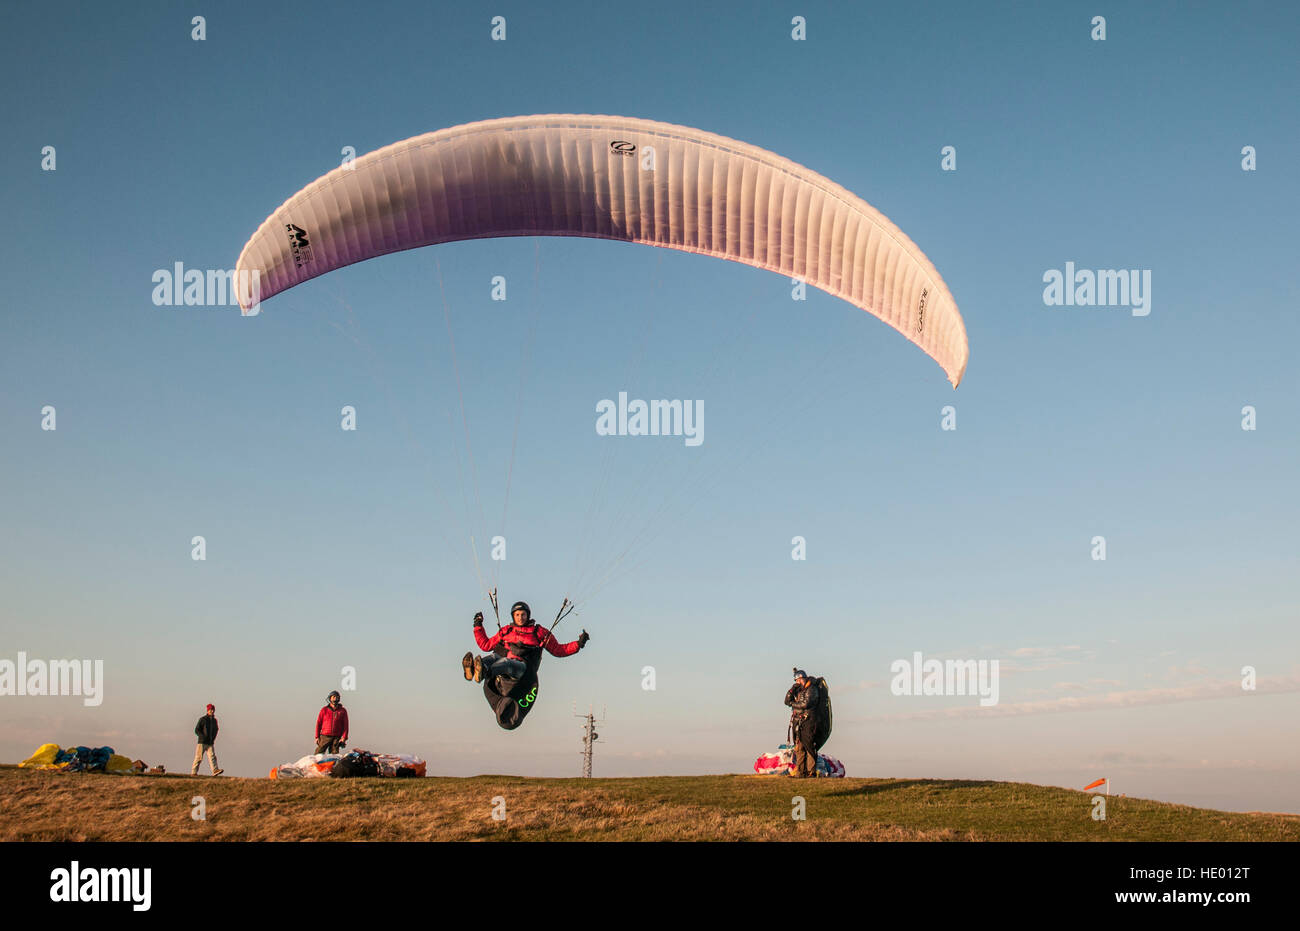 Beachy Head, Eastbourne, East Sussex, UK. 15th Dec, 2016. Southerly wind makes for perfect Paragliding conditions on the South Coast. © Stock Photo